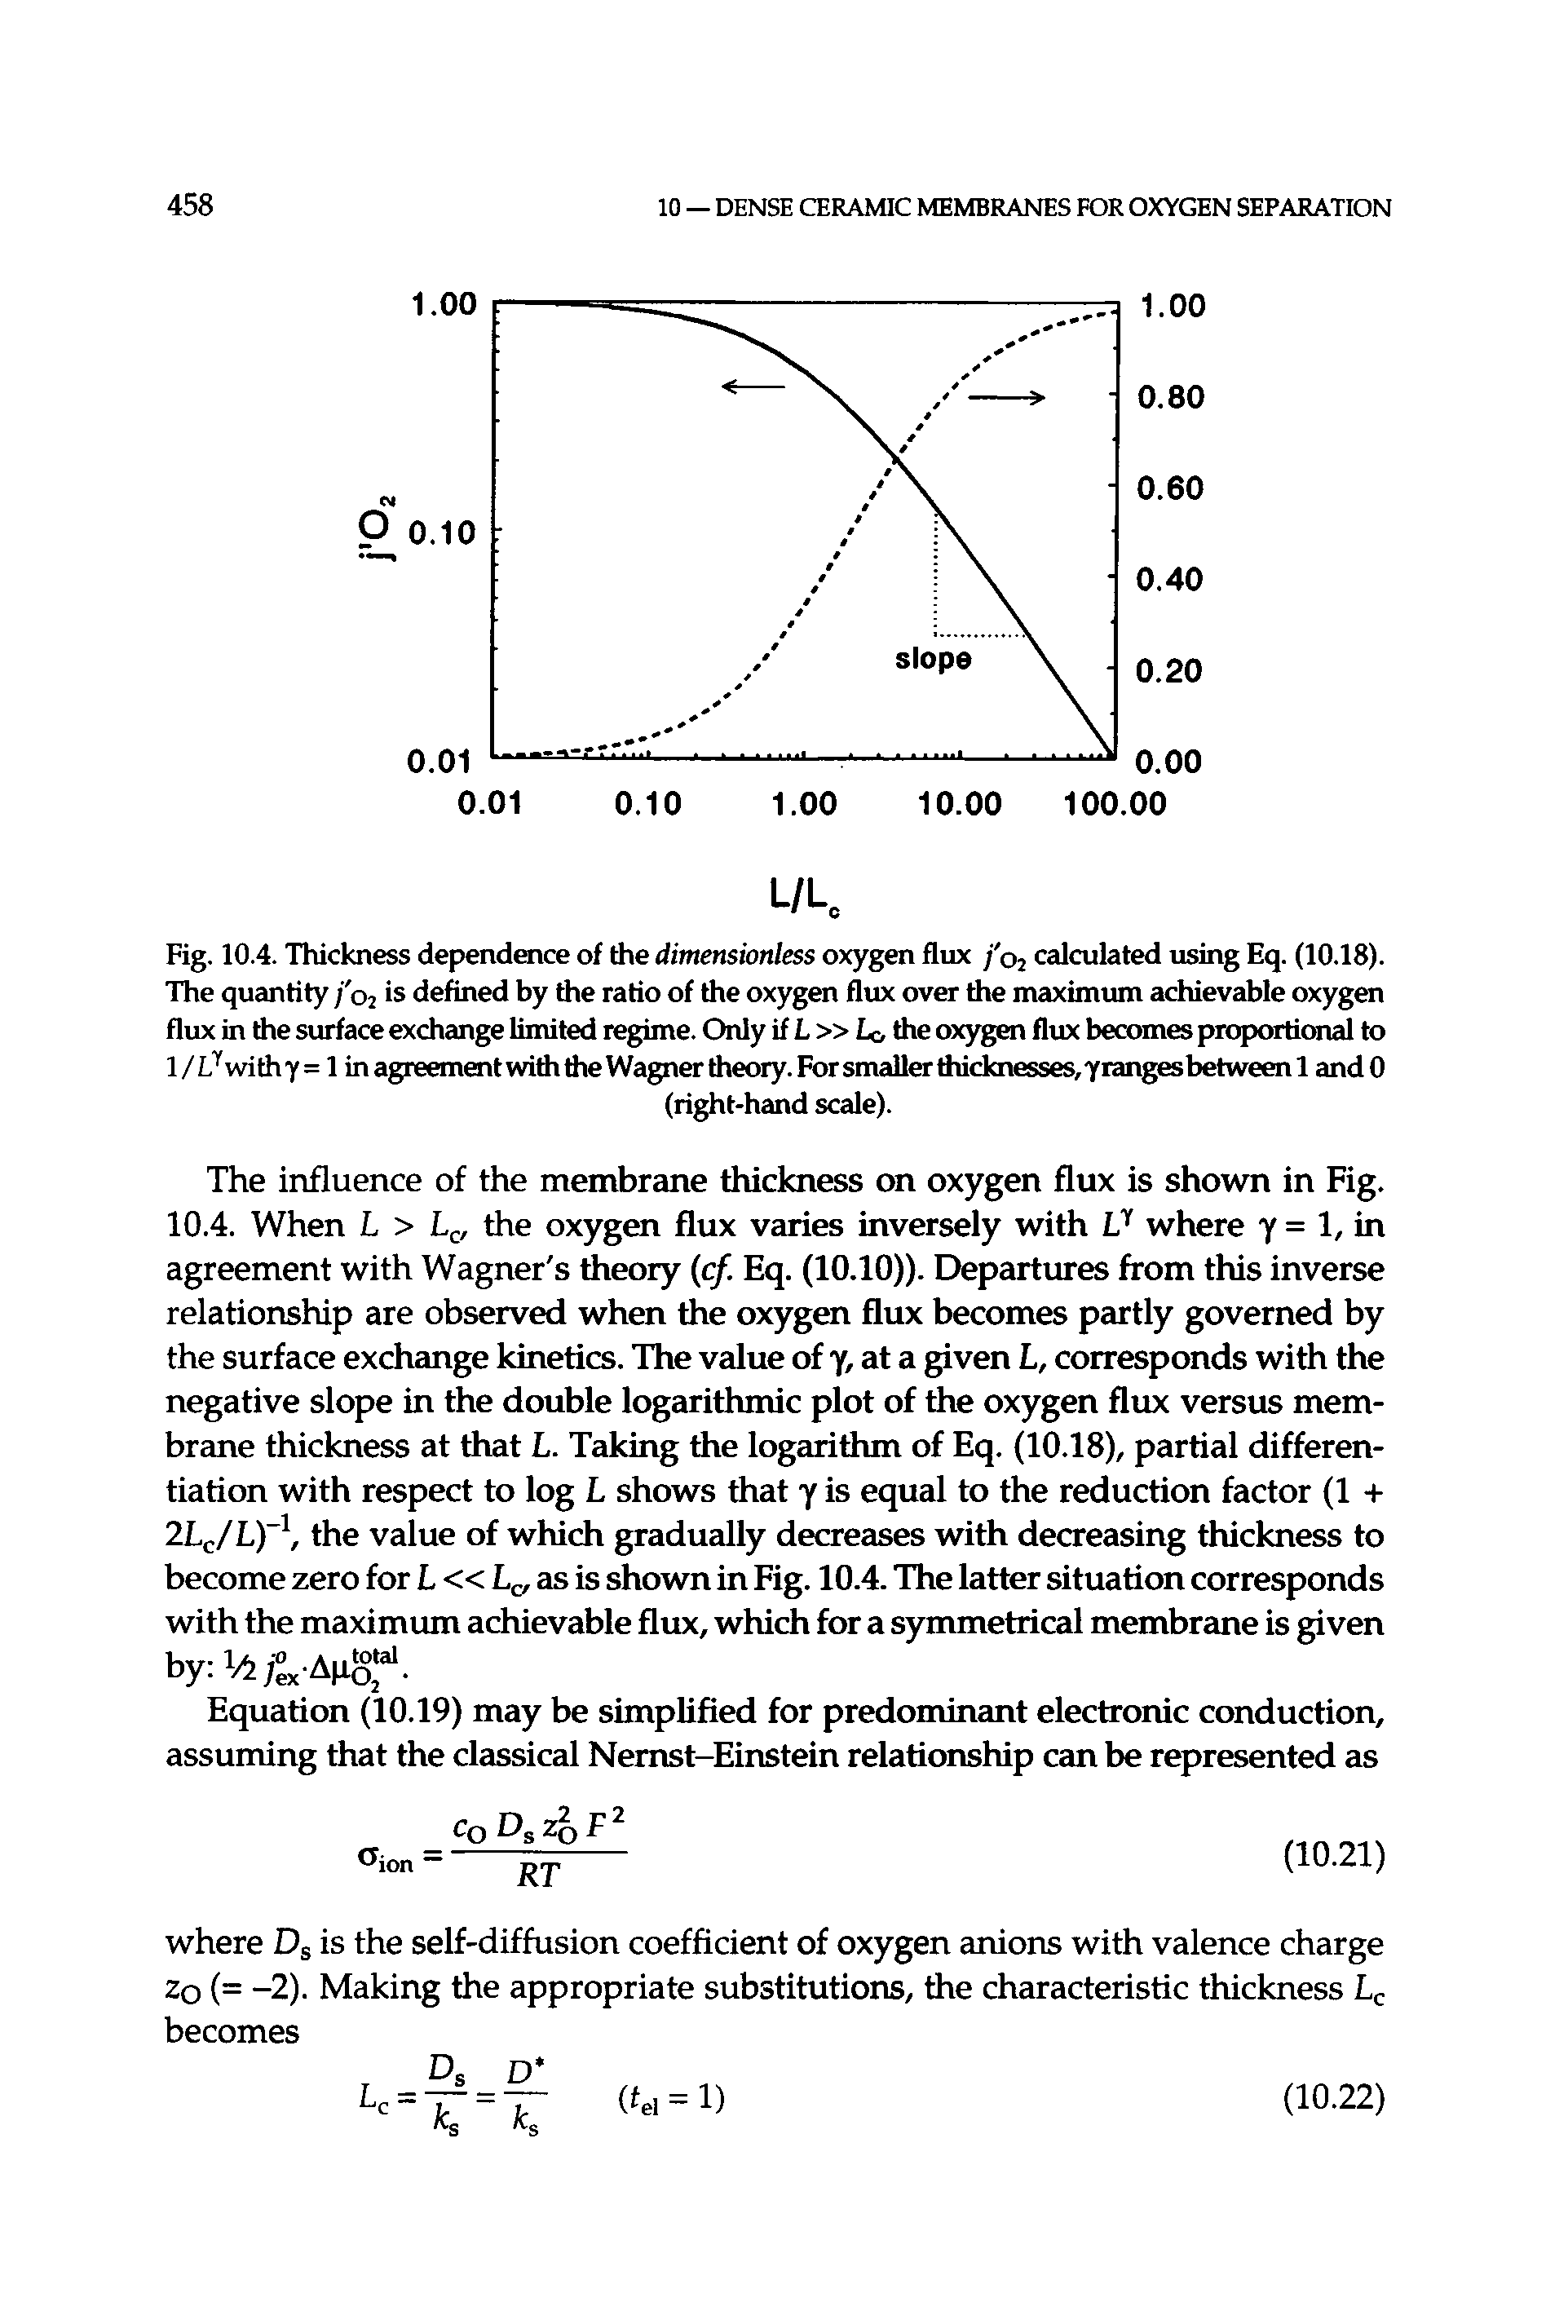 Fig. 10.4. Thickness dependence of the dimensionless oxygen flux j 02 calculated using Eq. (10.18). The quantity / 02 is defined by the ratio of the oxygen flux over the maximum achievable oxygen flux in the surface exchange limited regime. Only if L Lo the oxygen flux becomes proportional to 1/L withy= 1 in agreementwifli tile Wagner theory.For smaller thicknesses, yrangesbetweenl andO...